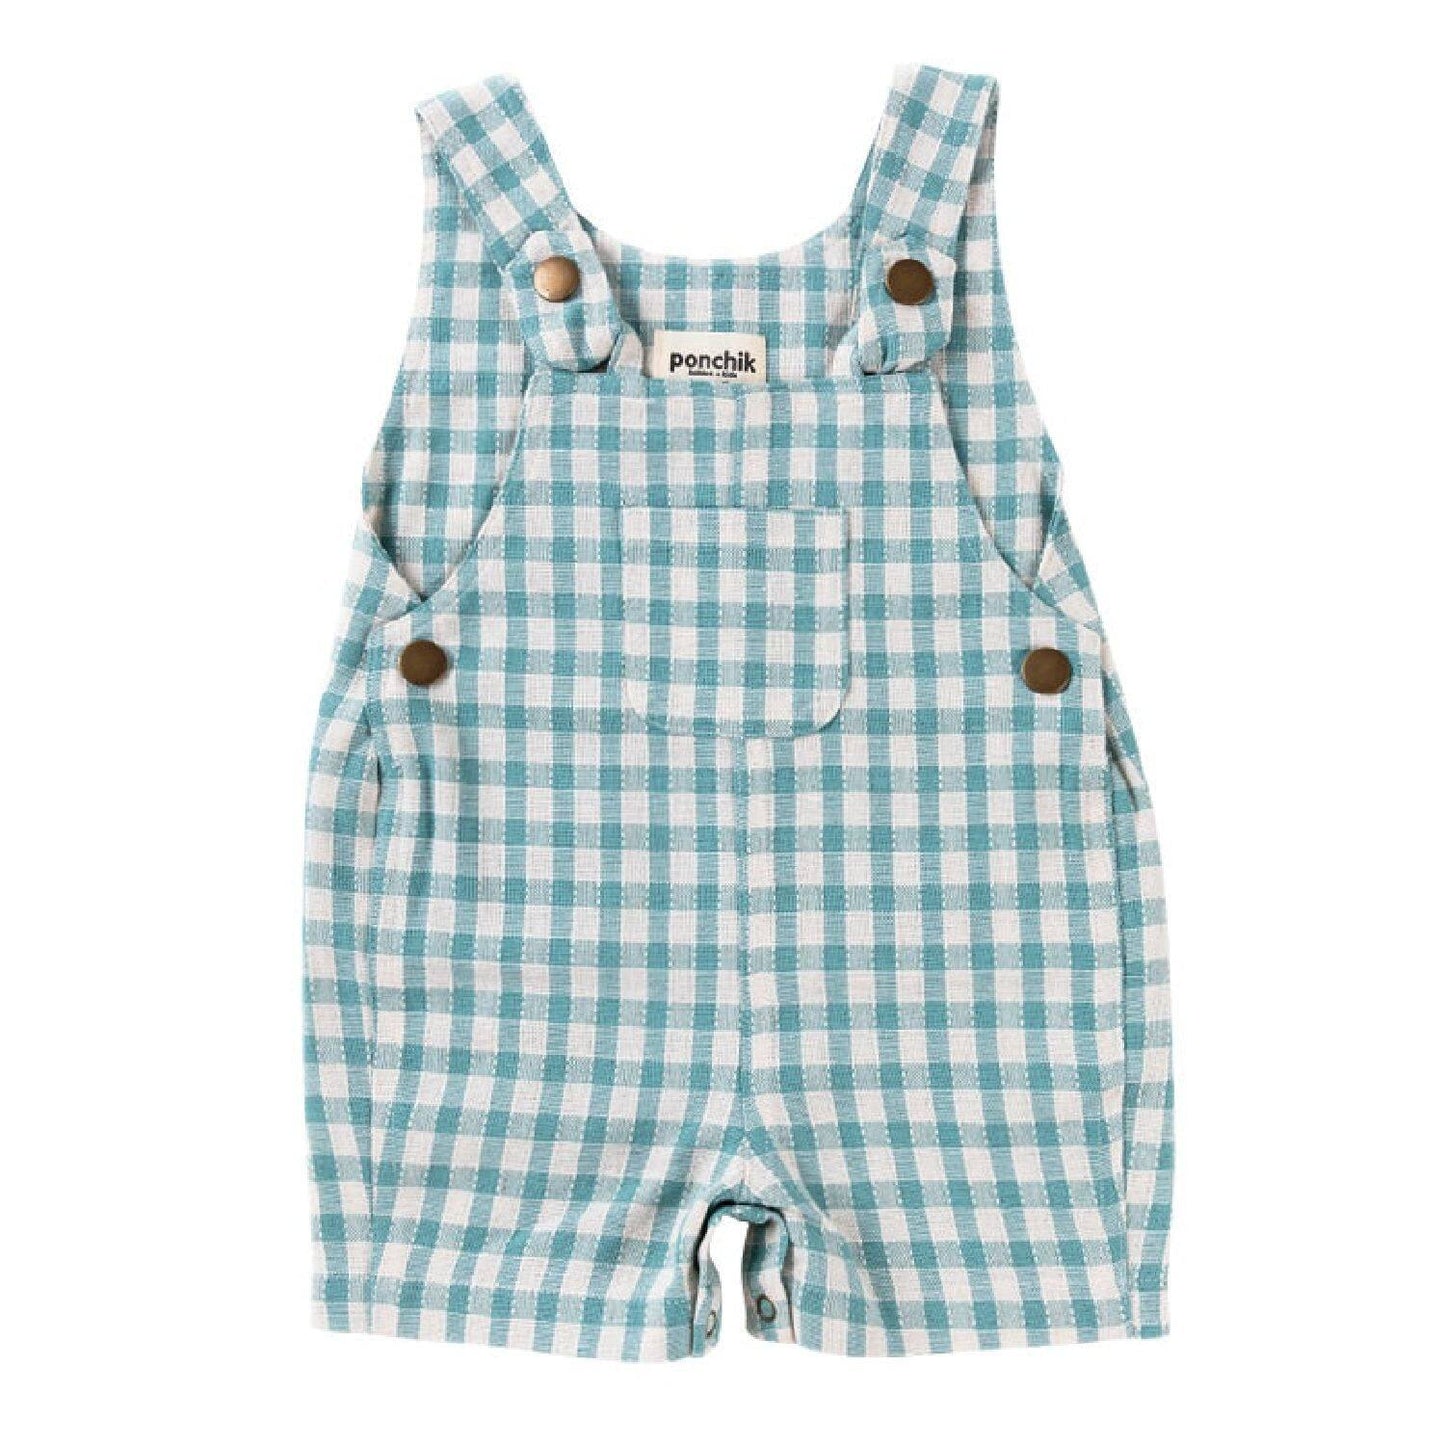 Cotton Dungaree Overalls | Peacock Gingham